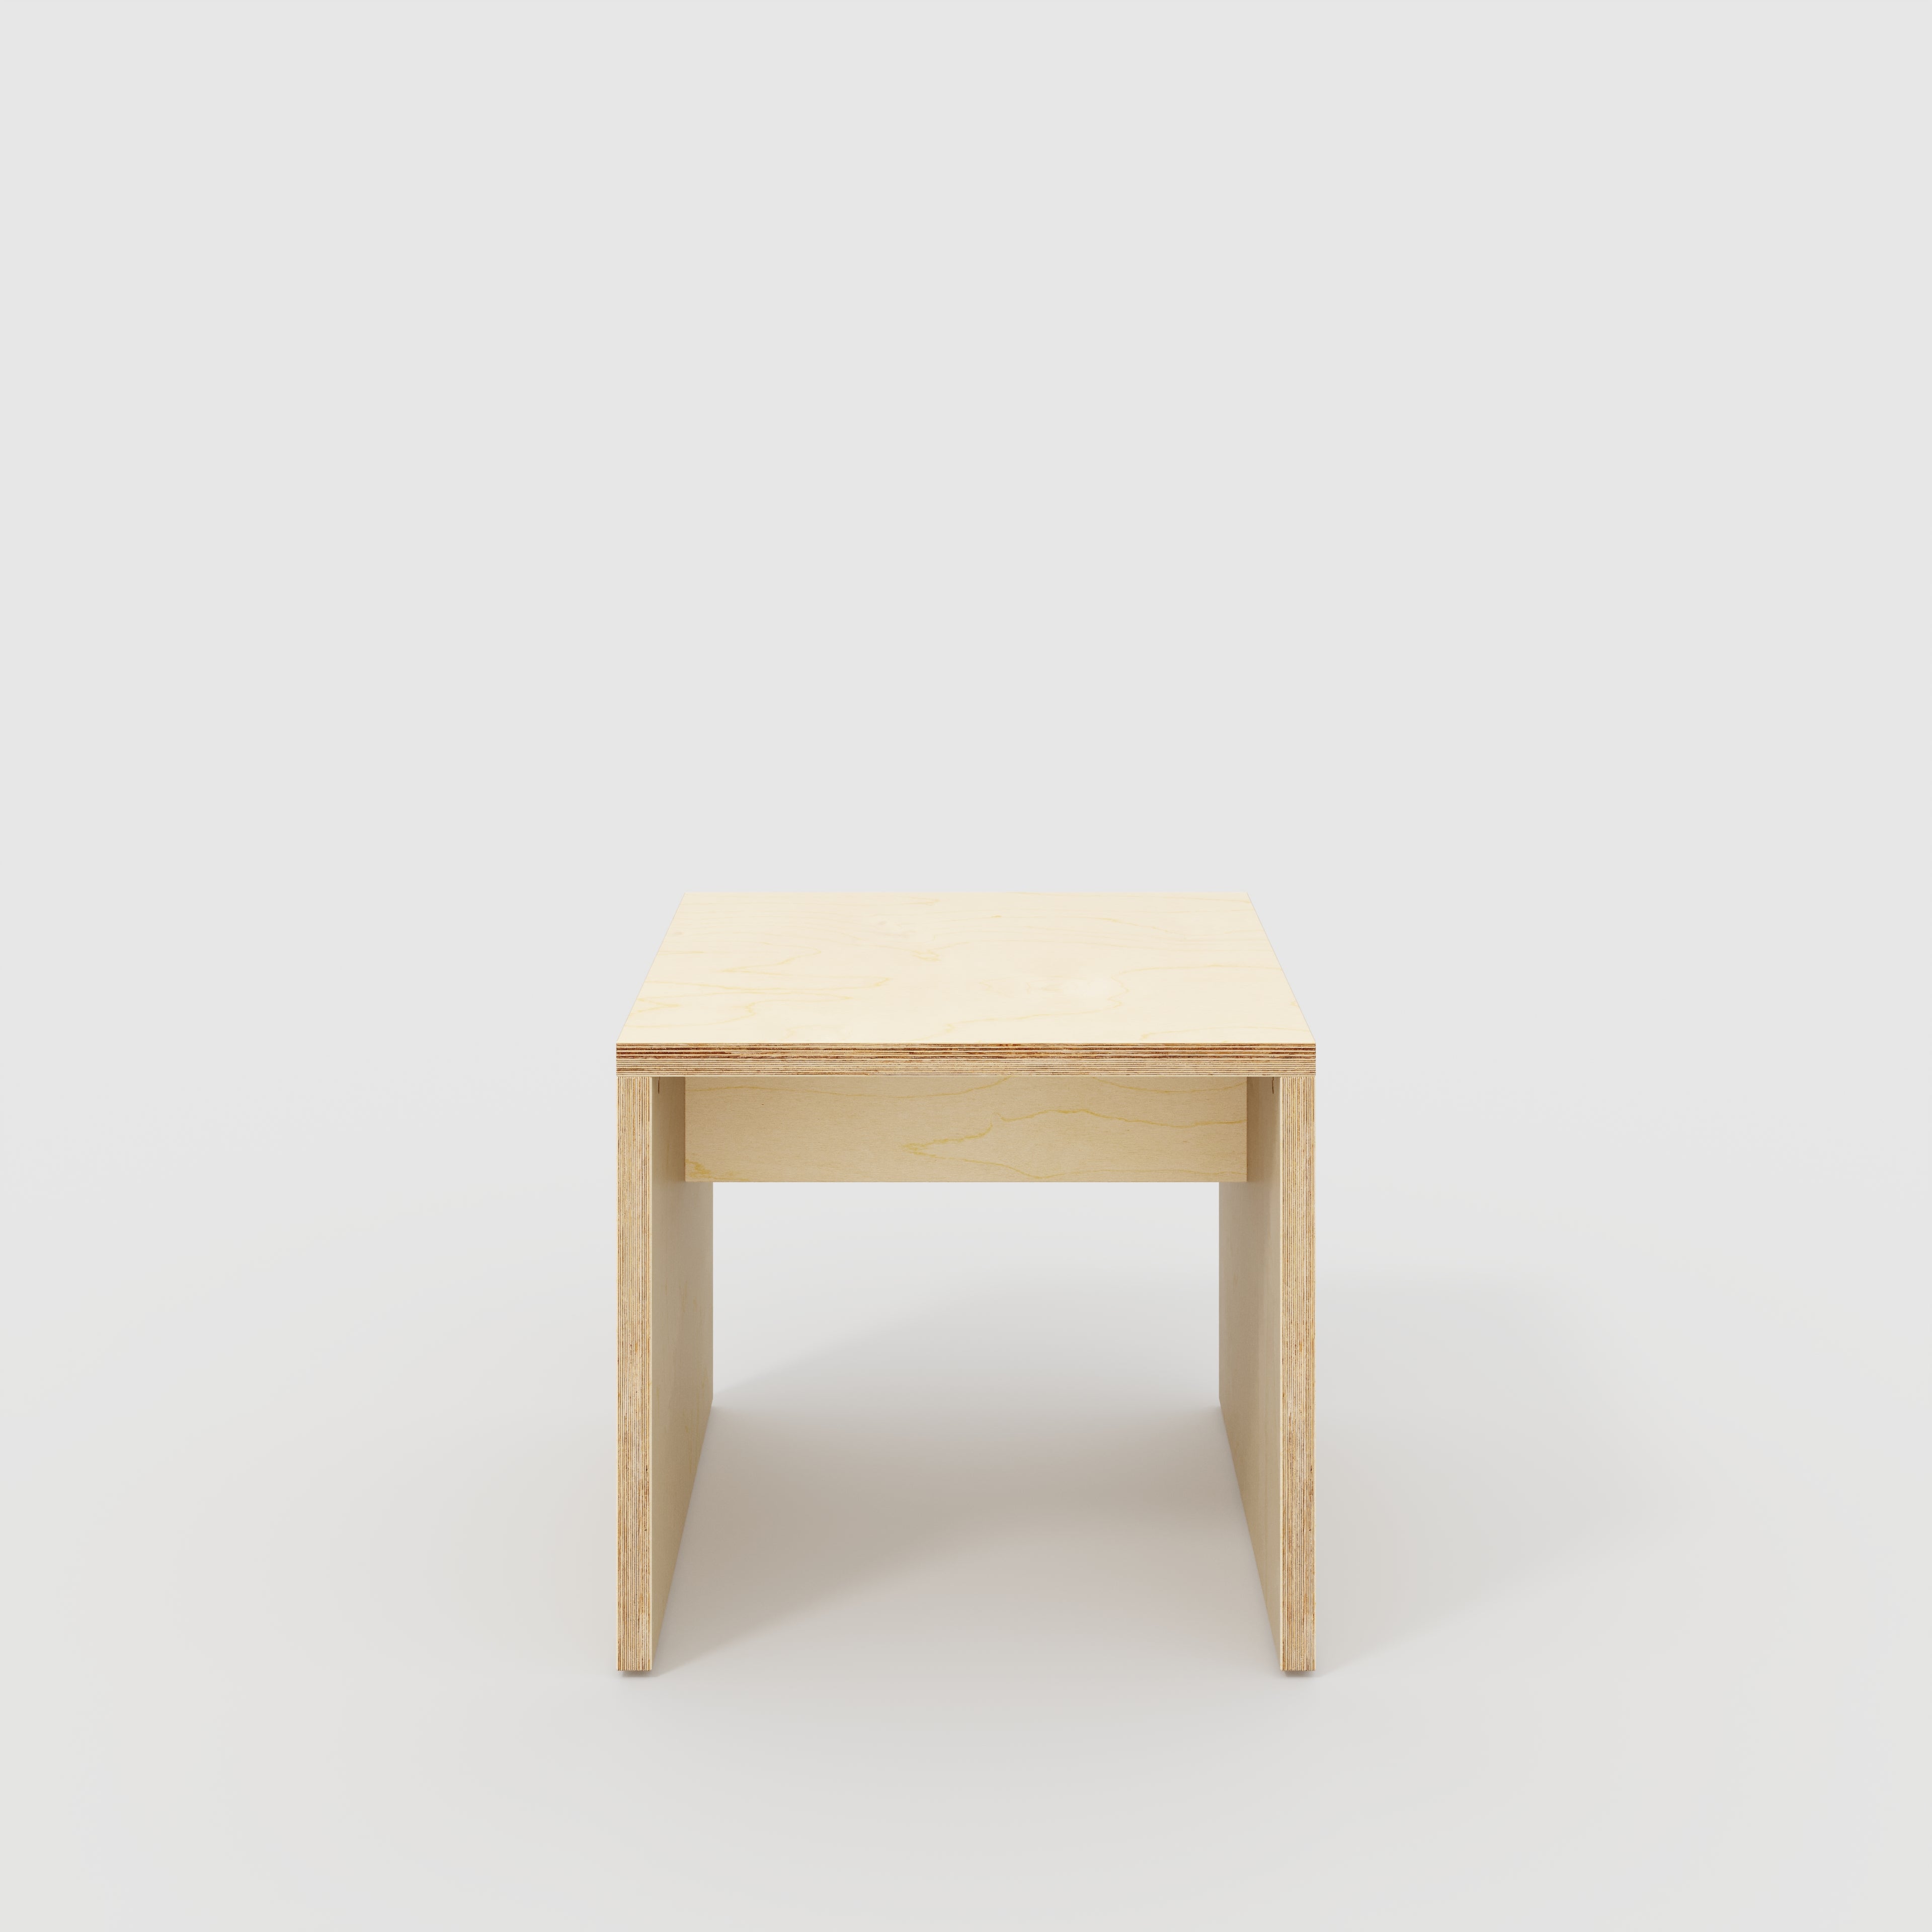 Side Table with Solid Sides - Plywood Birch - 500(w) x 500(d) x 450(h)